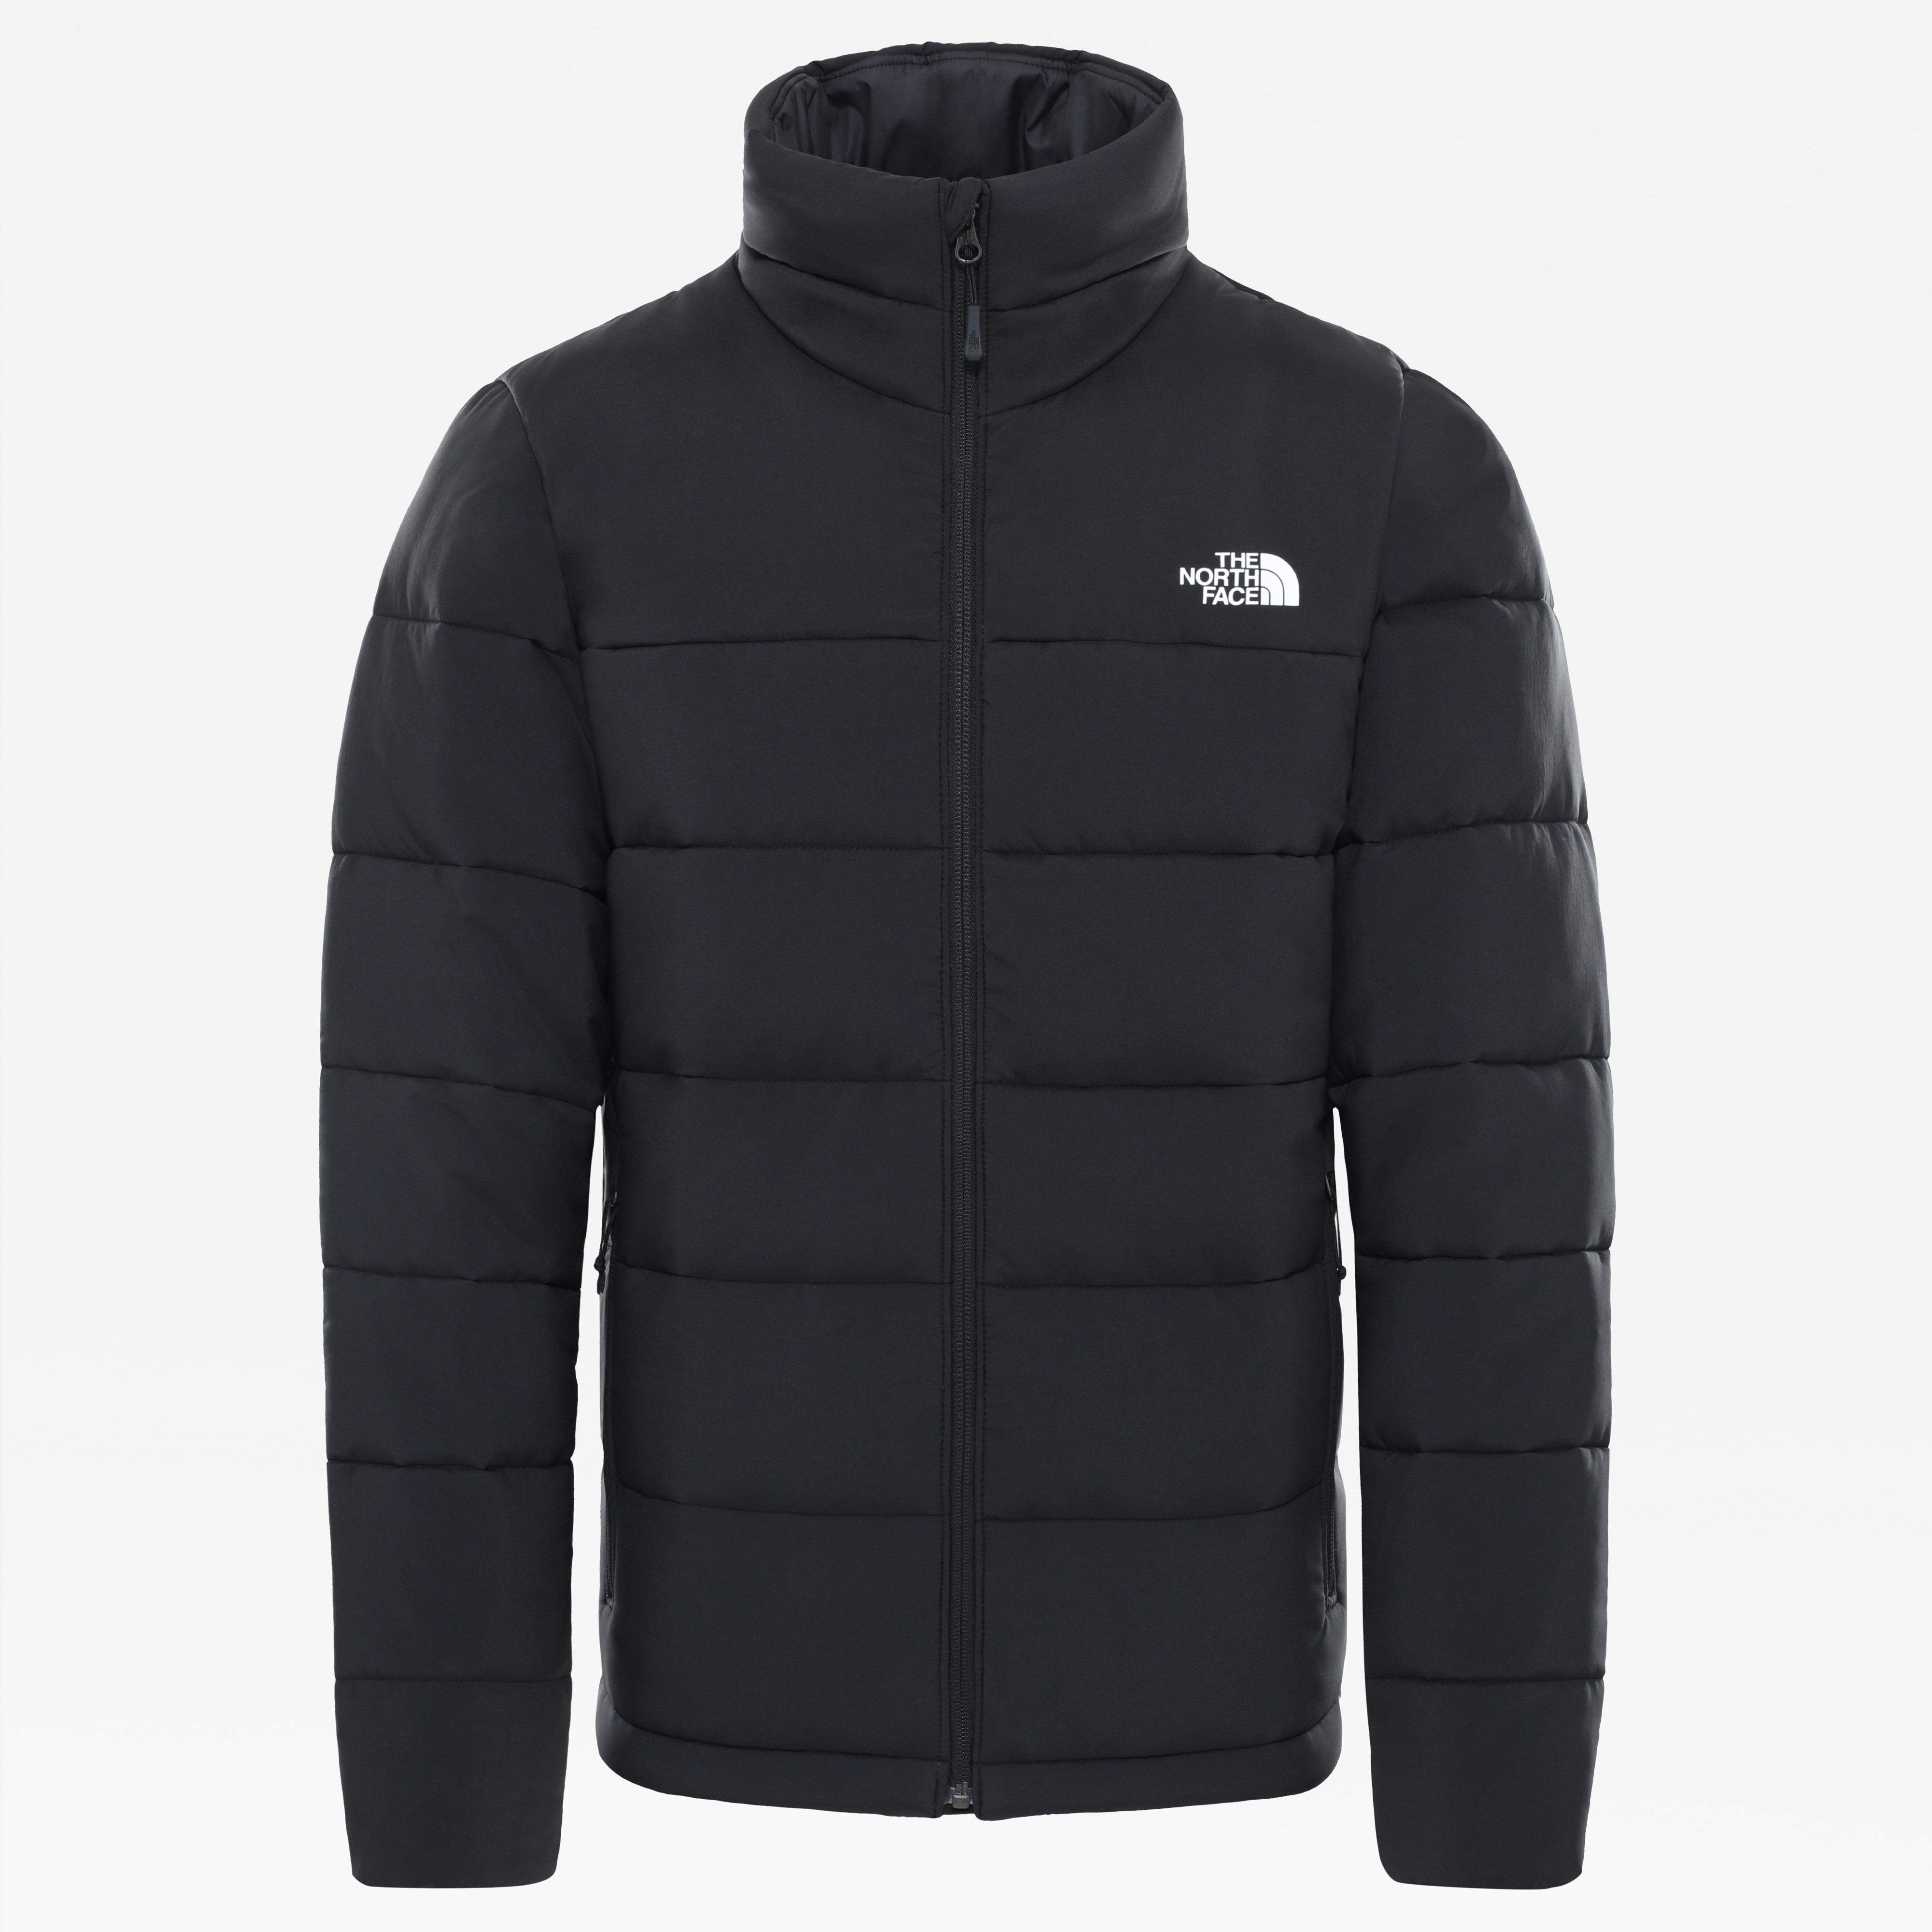 north face white and black puffer jacket